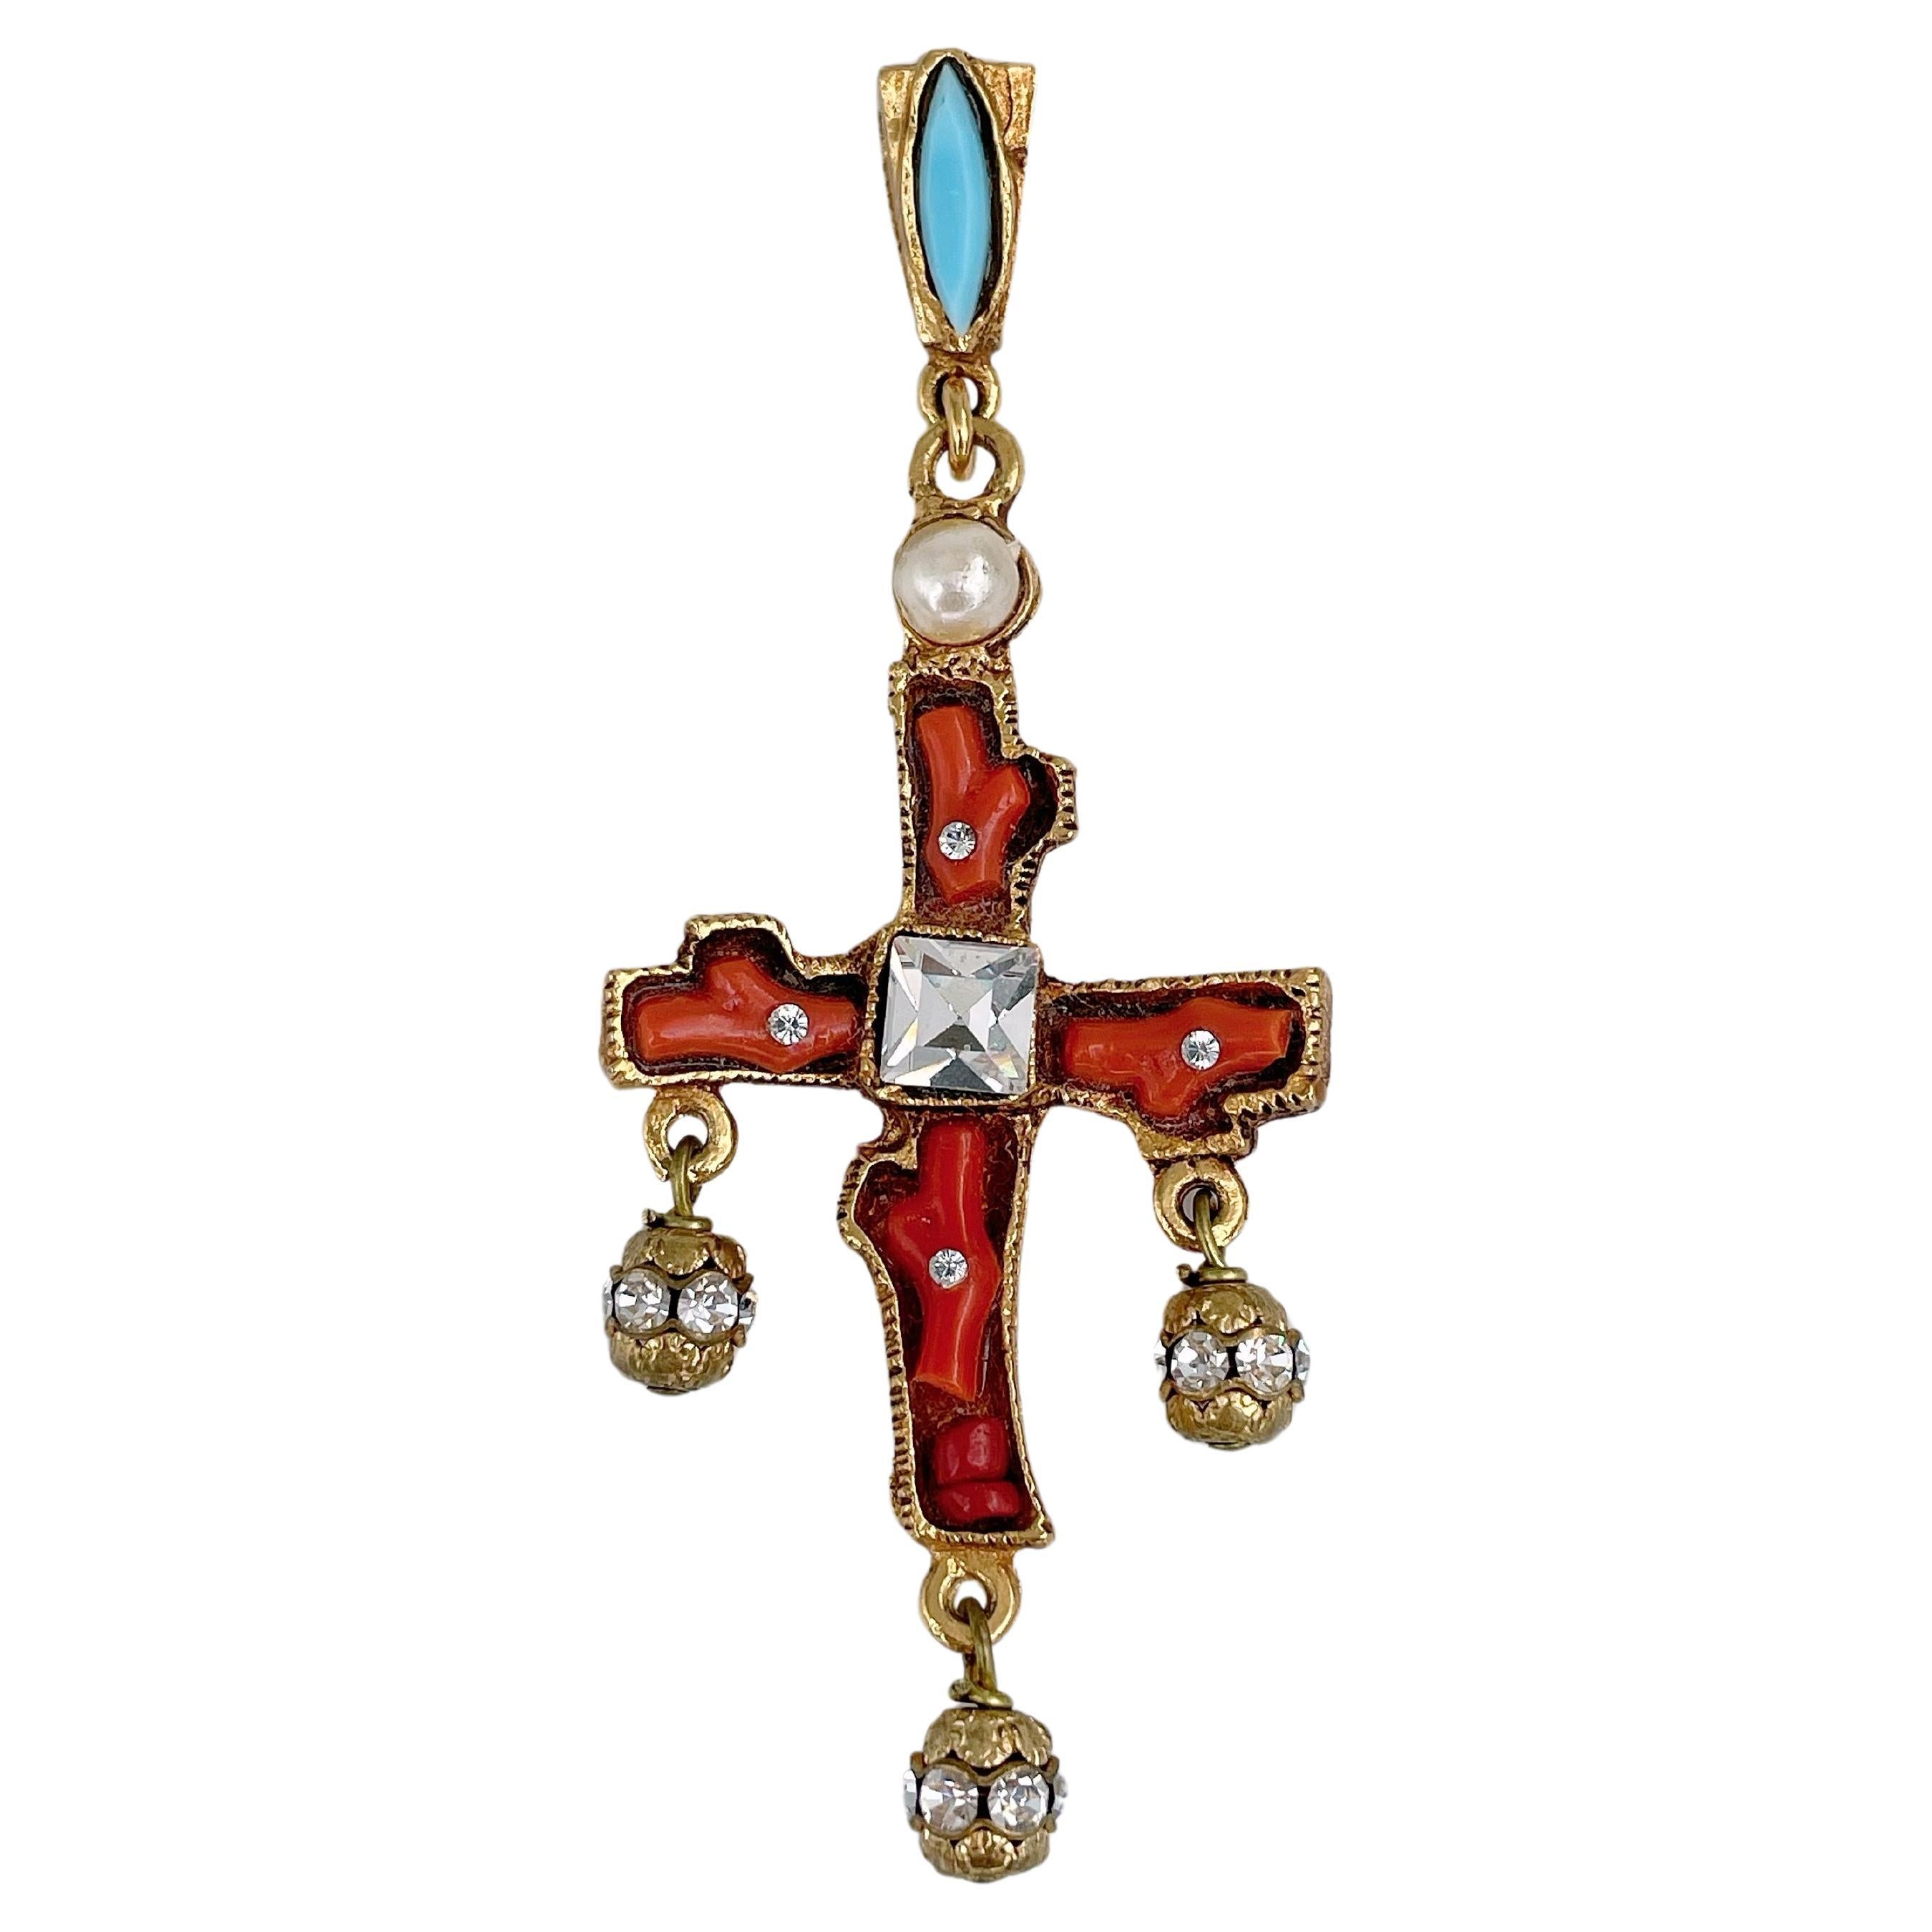 1990s Vintage Christian Lacroix Gold Tone Faux Coral Crystal Pearl Cross Pendant For Sale